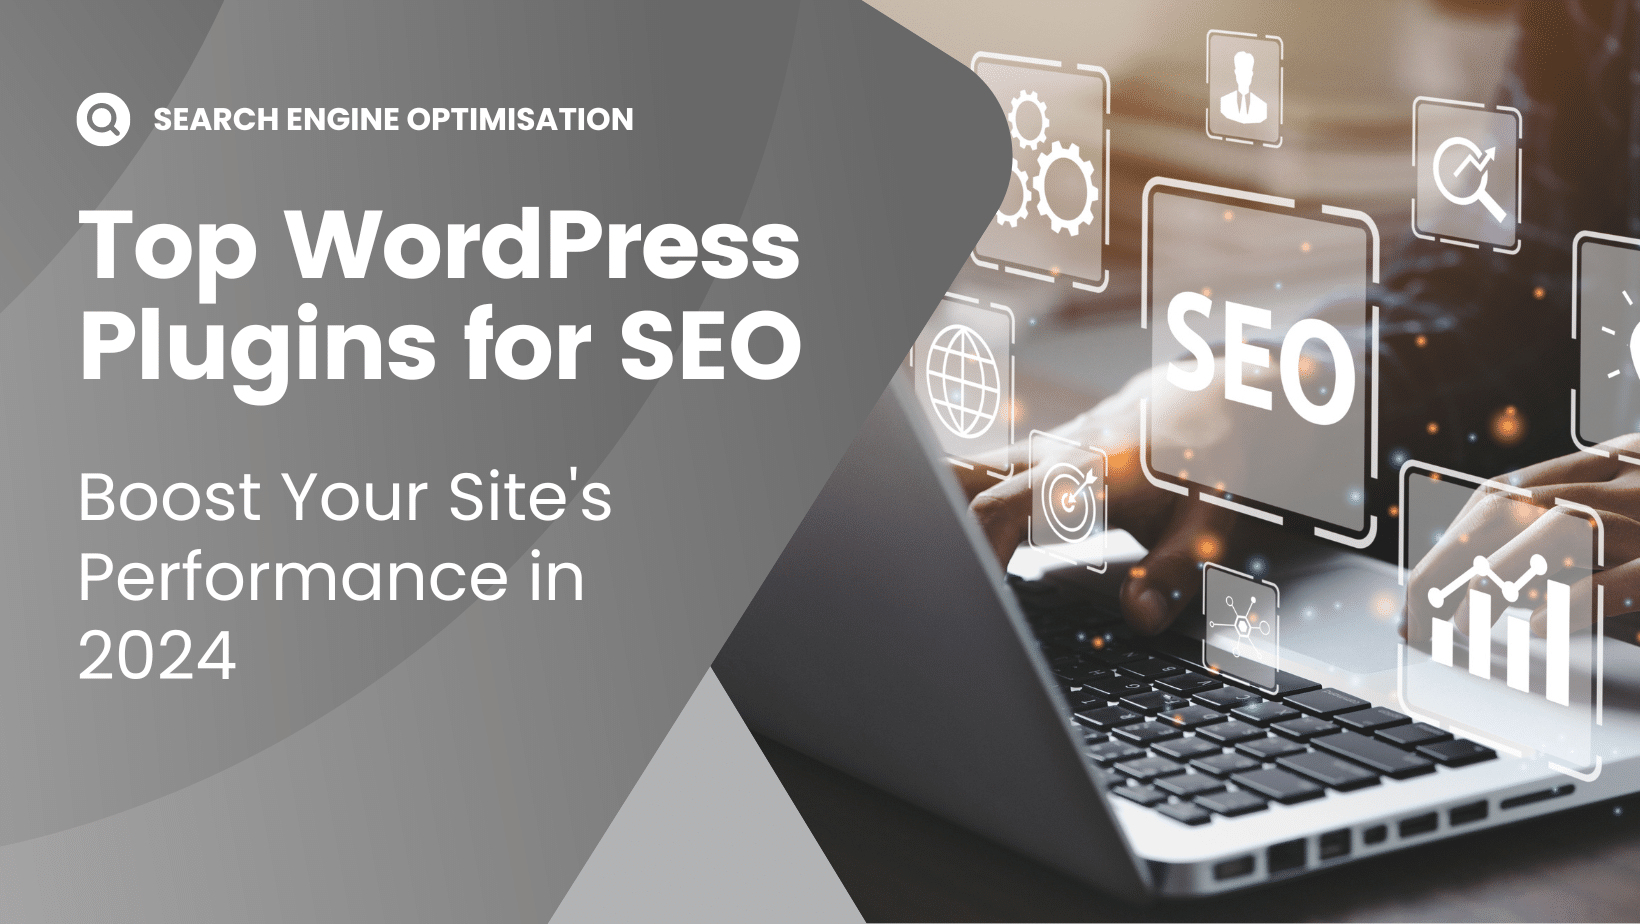 A person typing on a laptop with "SEO" and various related icons displayed. Text reads "Search Engine Optimisation: Top WordPress SEO Plugins for 2024. Boost Your Site's Performance.